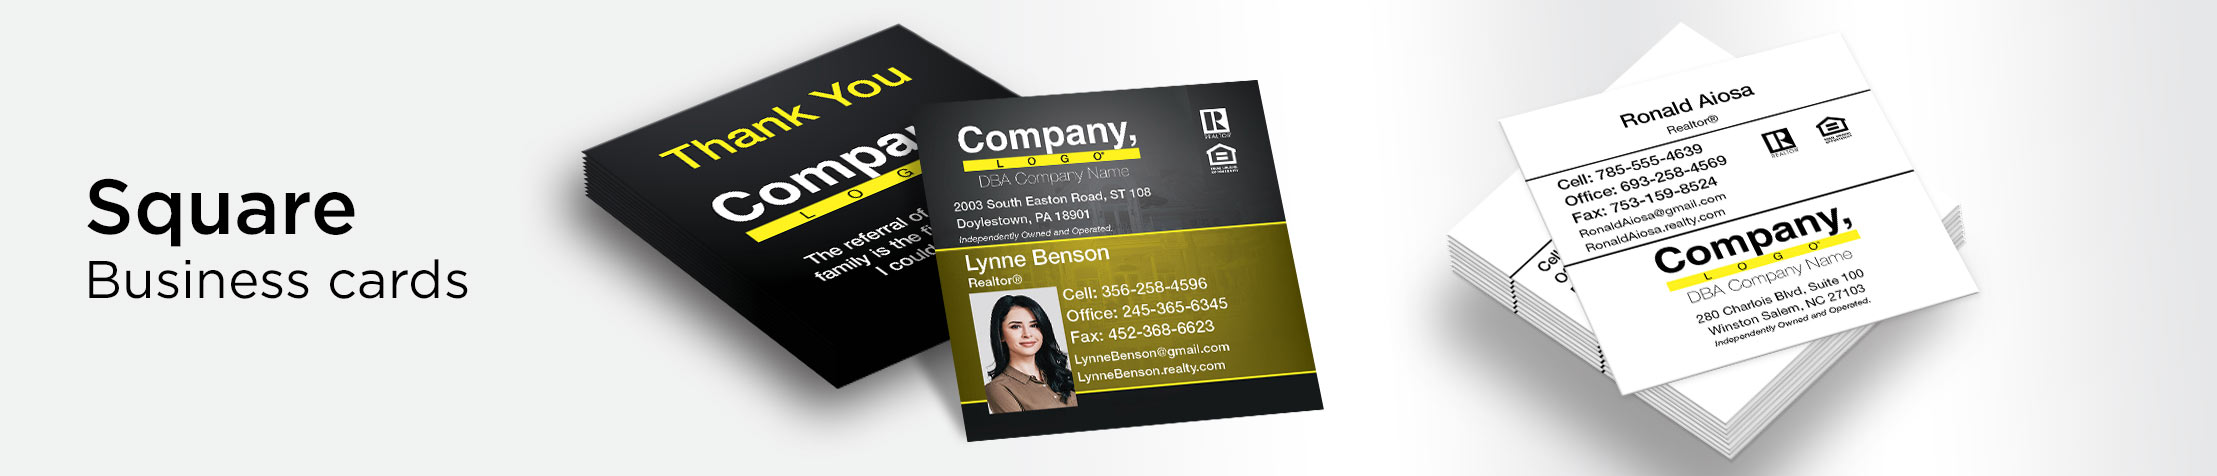 Weichert Real Estate Square Business Cards - Weichert  - Modern, Unique Business Cards for Realtors with a Glossy or Matte Finish | BestPrintBuy.com